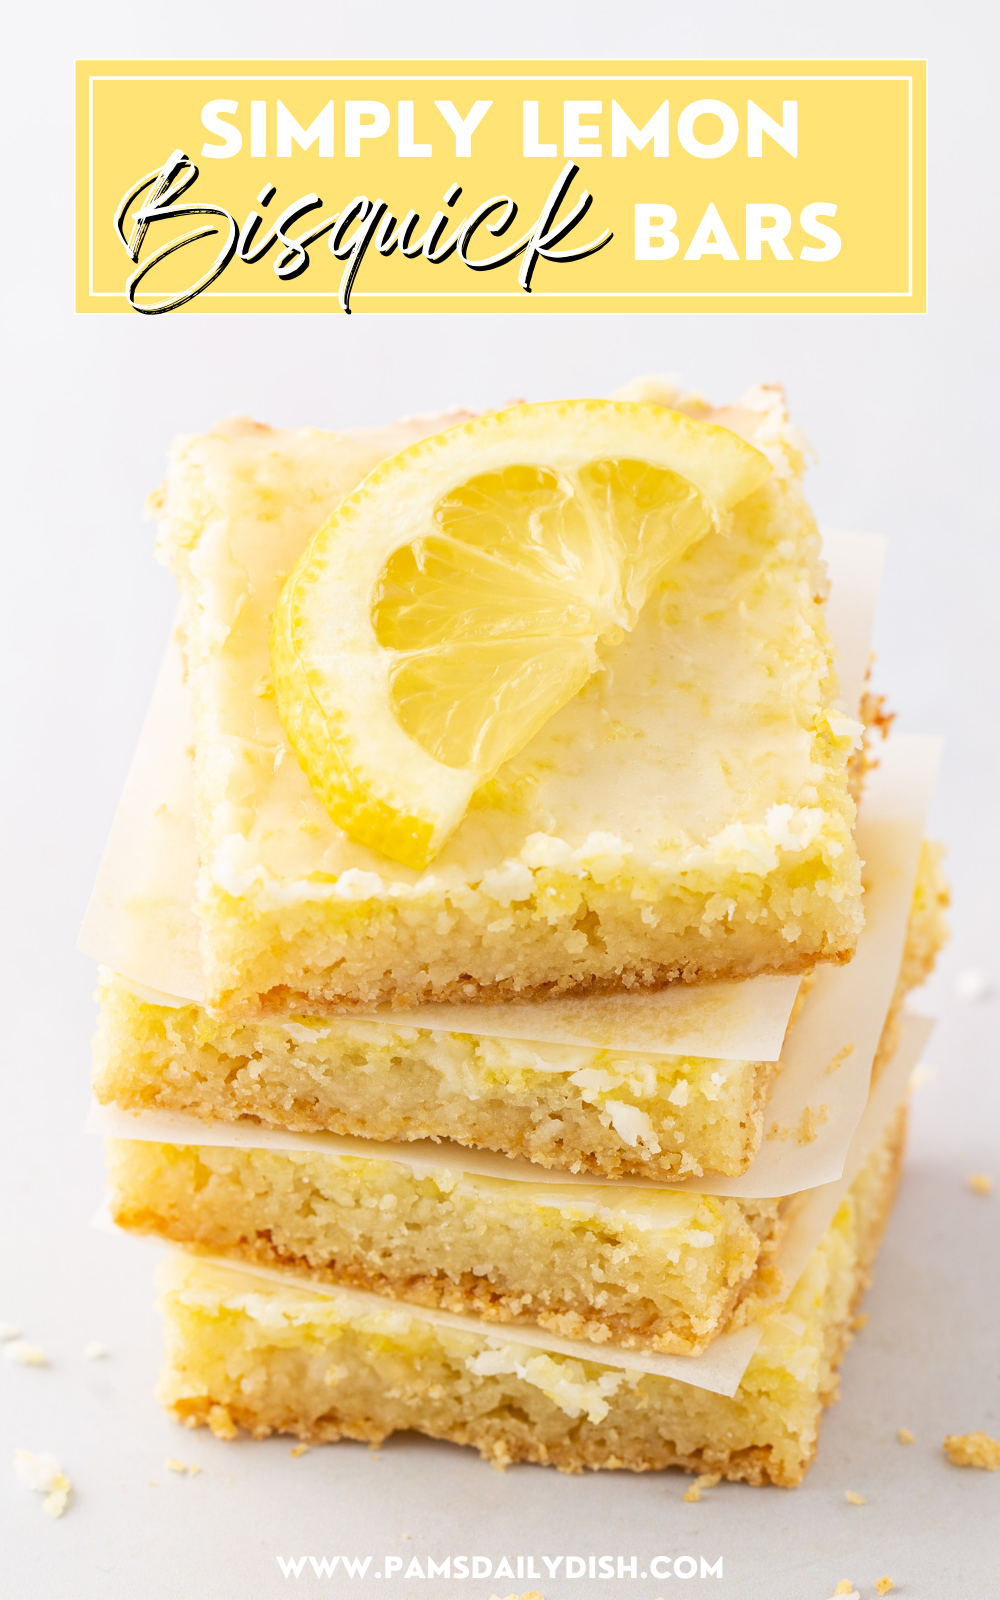 These Bisquick lemon bars are such an easy and simple dessert idea. The perfect recipe for your dessert table this summer. They're a quick snack to make and are great for breakfast too! All it takes is a handful of ingredients like Bisquick, lemon, eggs, and sugar. The glaze is so wonderfully lemony and delicious. It's sure to be a new family favorite like it is in my house! Pack it for work or school so you have a nice little pick-me-up for lunch. via @skinnydesserts